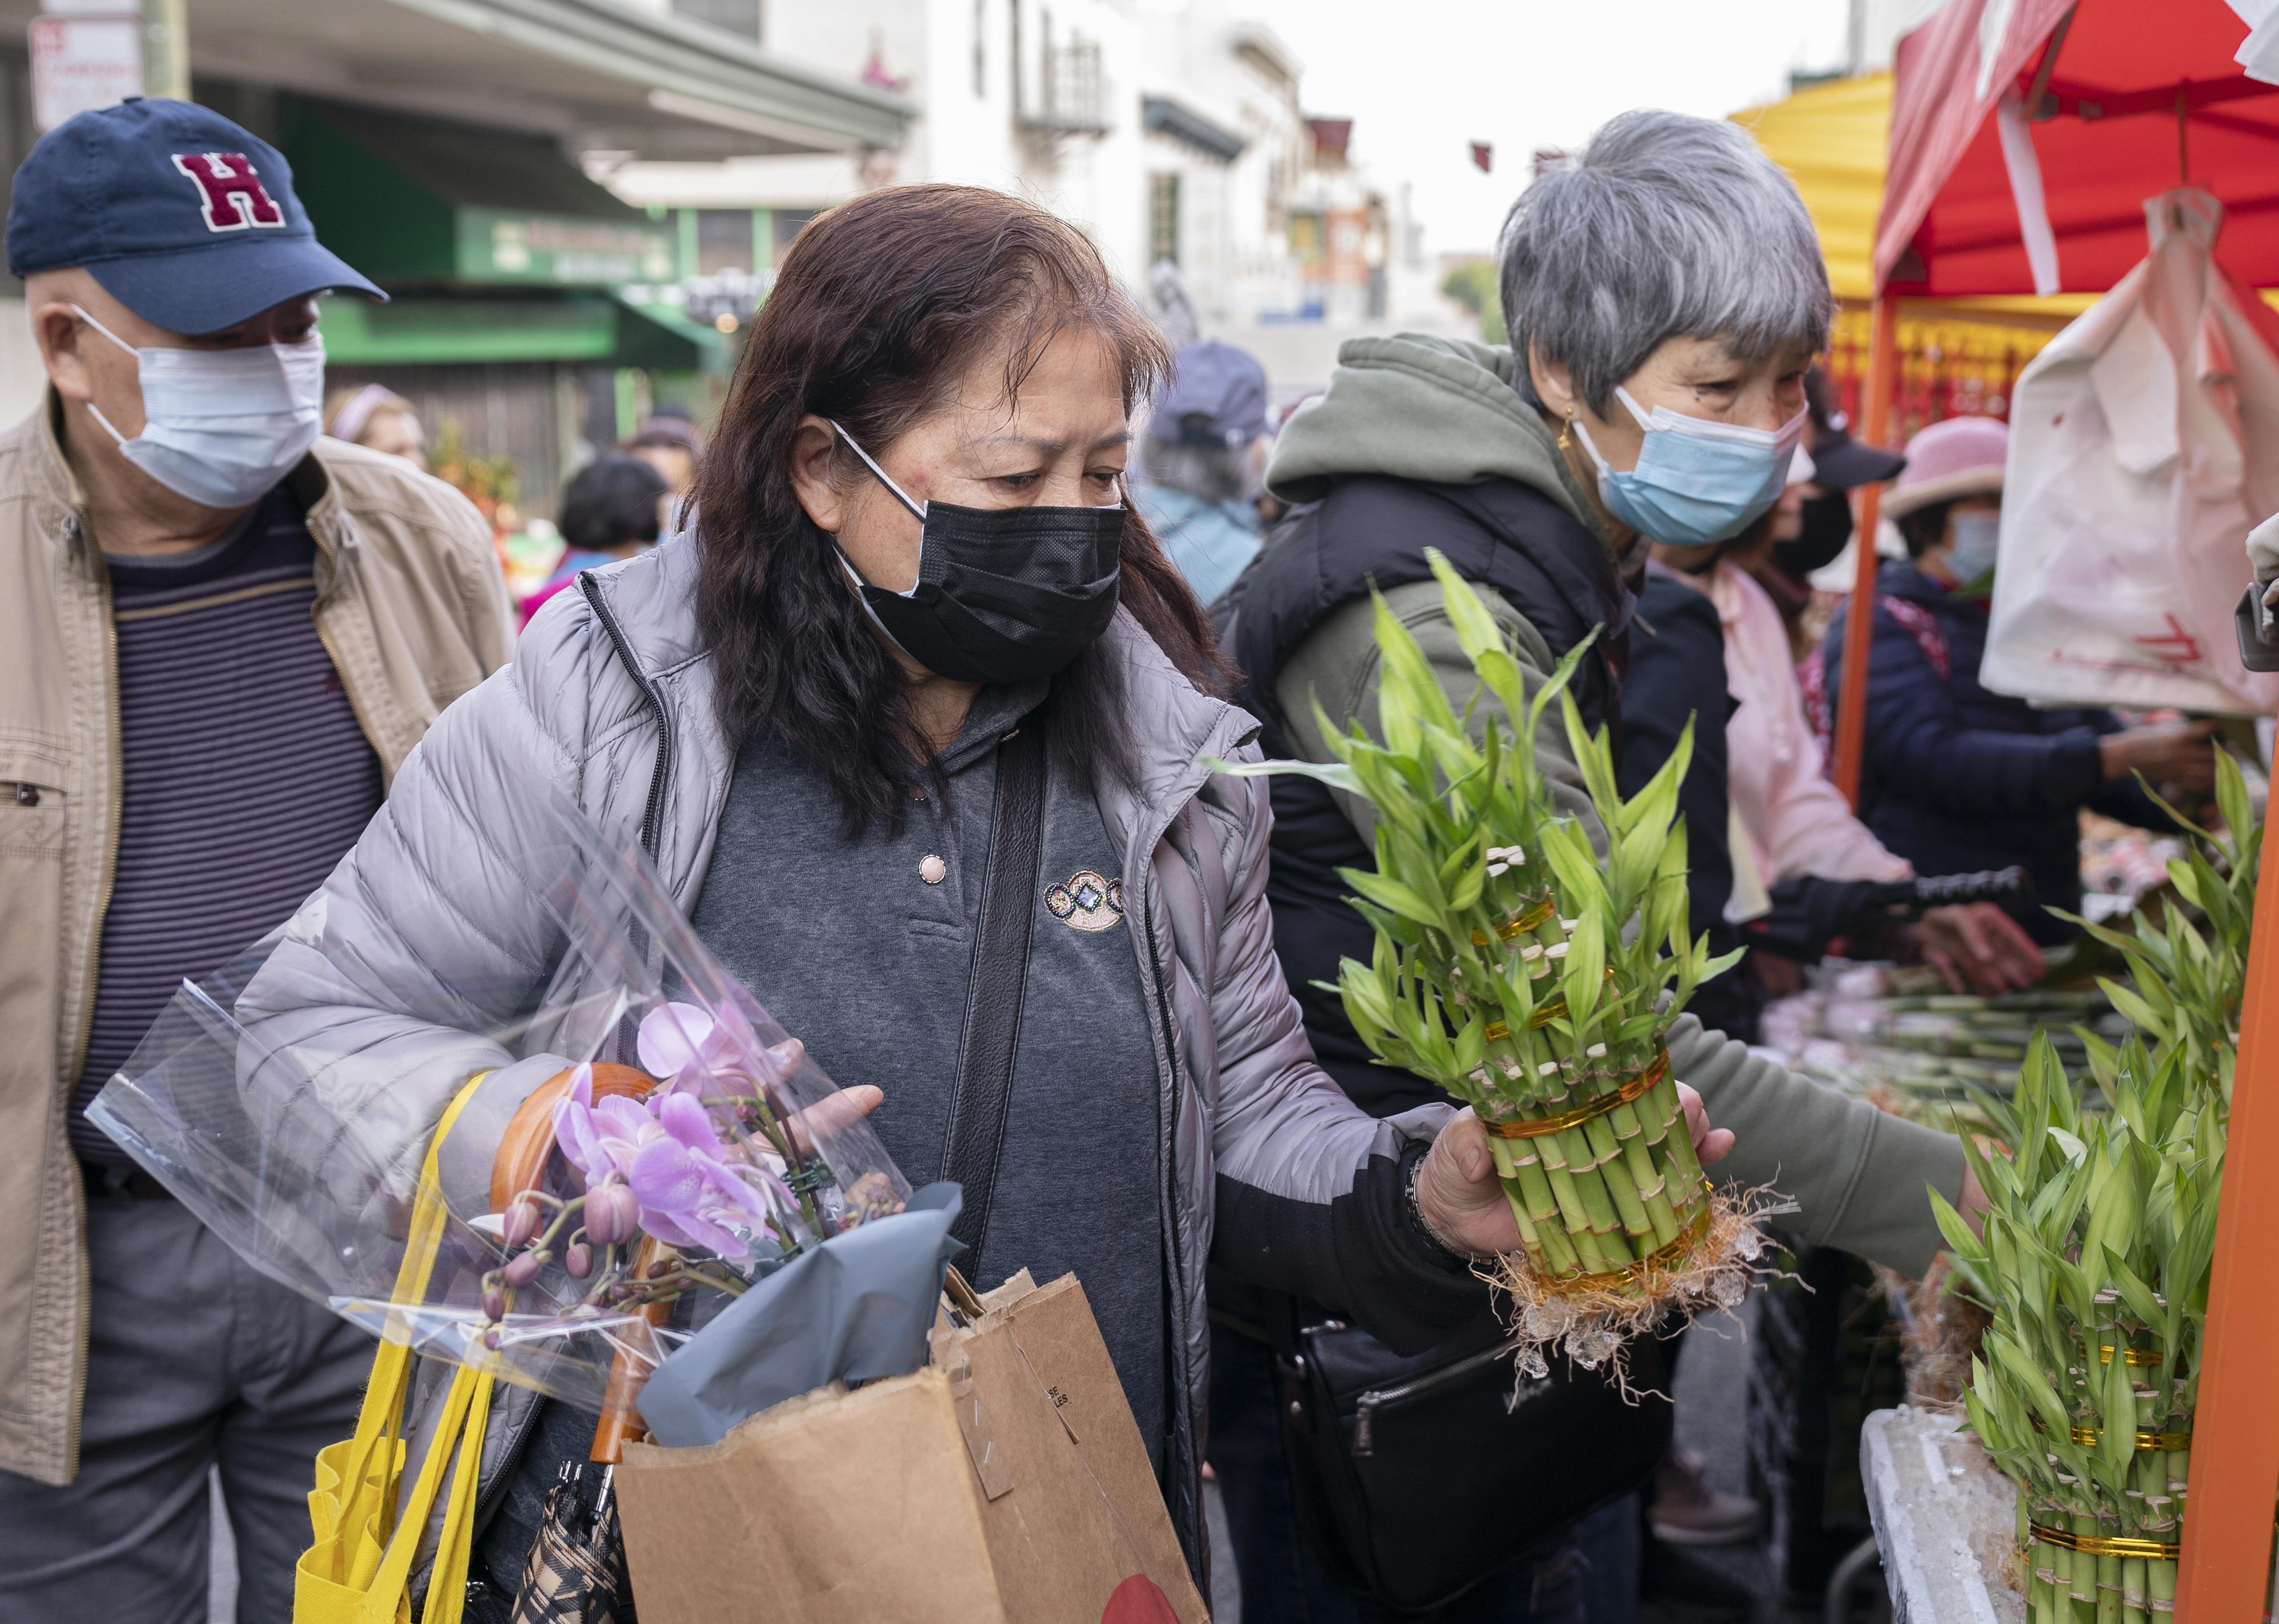 People wearing masks shopping for plants and flowers at an outdoor market.